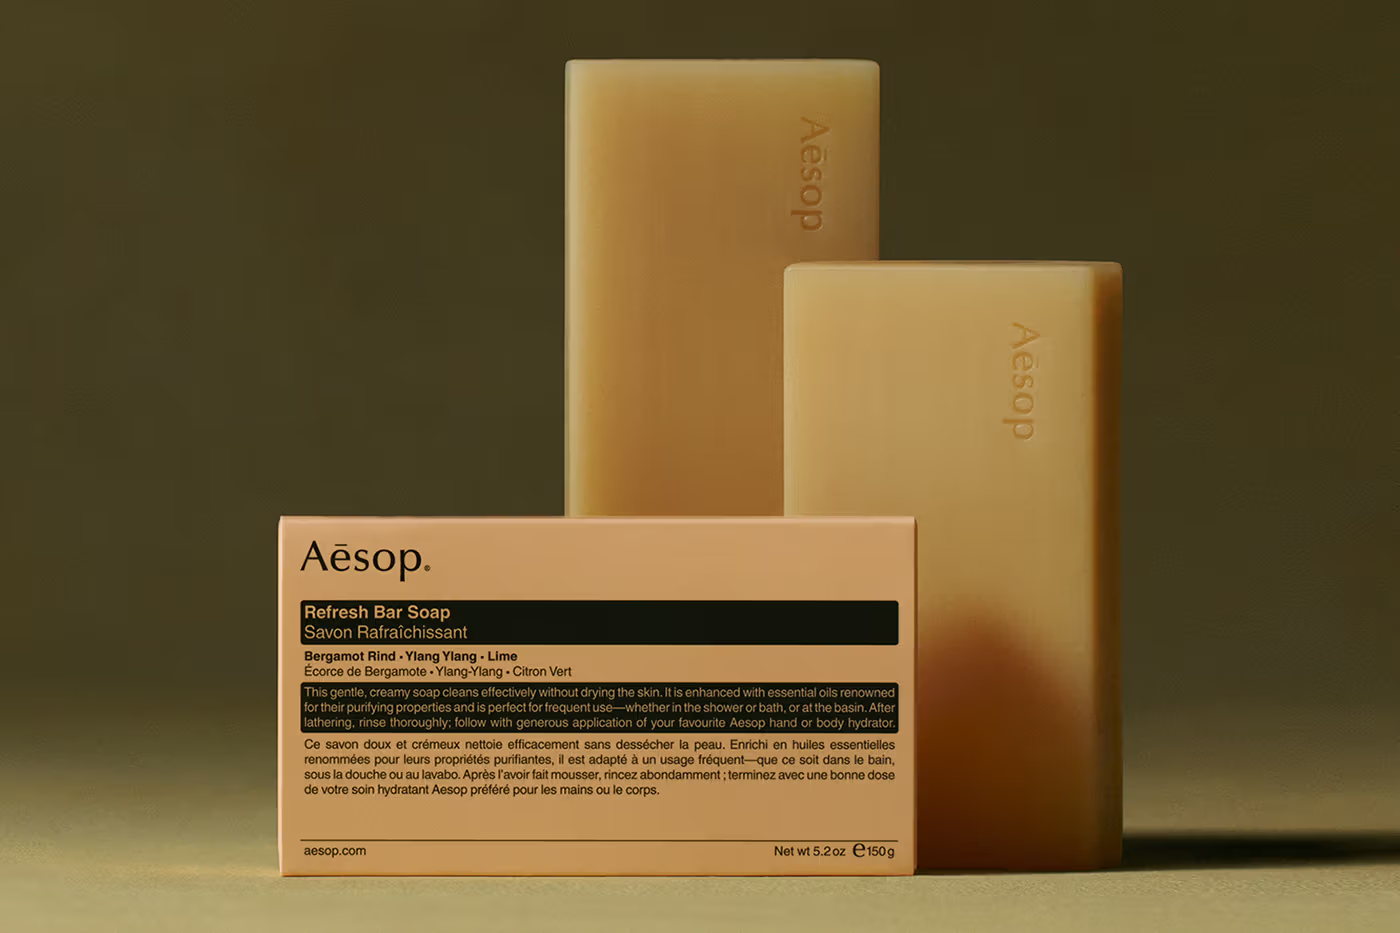 Aesop's New Body Bar Soap Continues The Brand's Quiet Luxury Identity ...